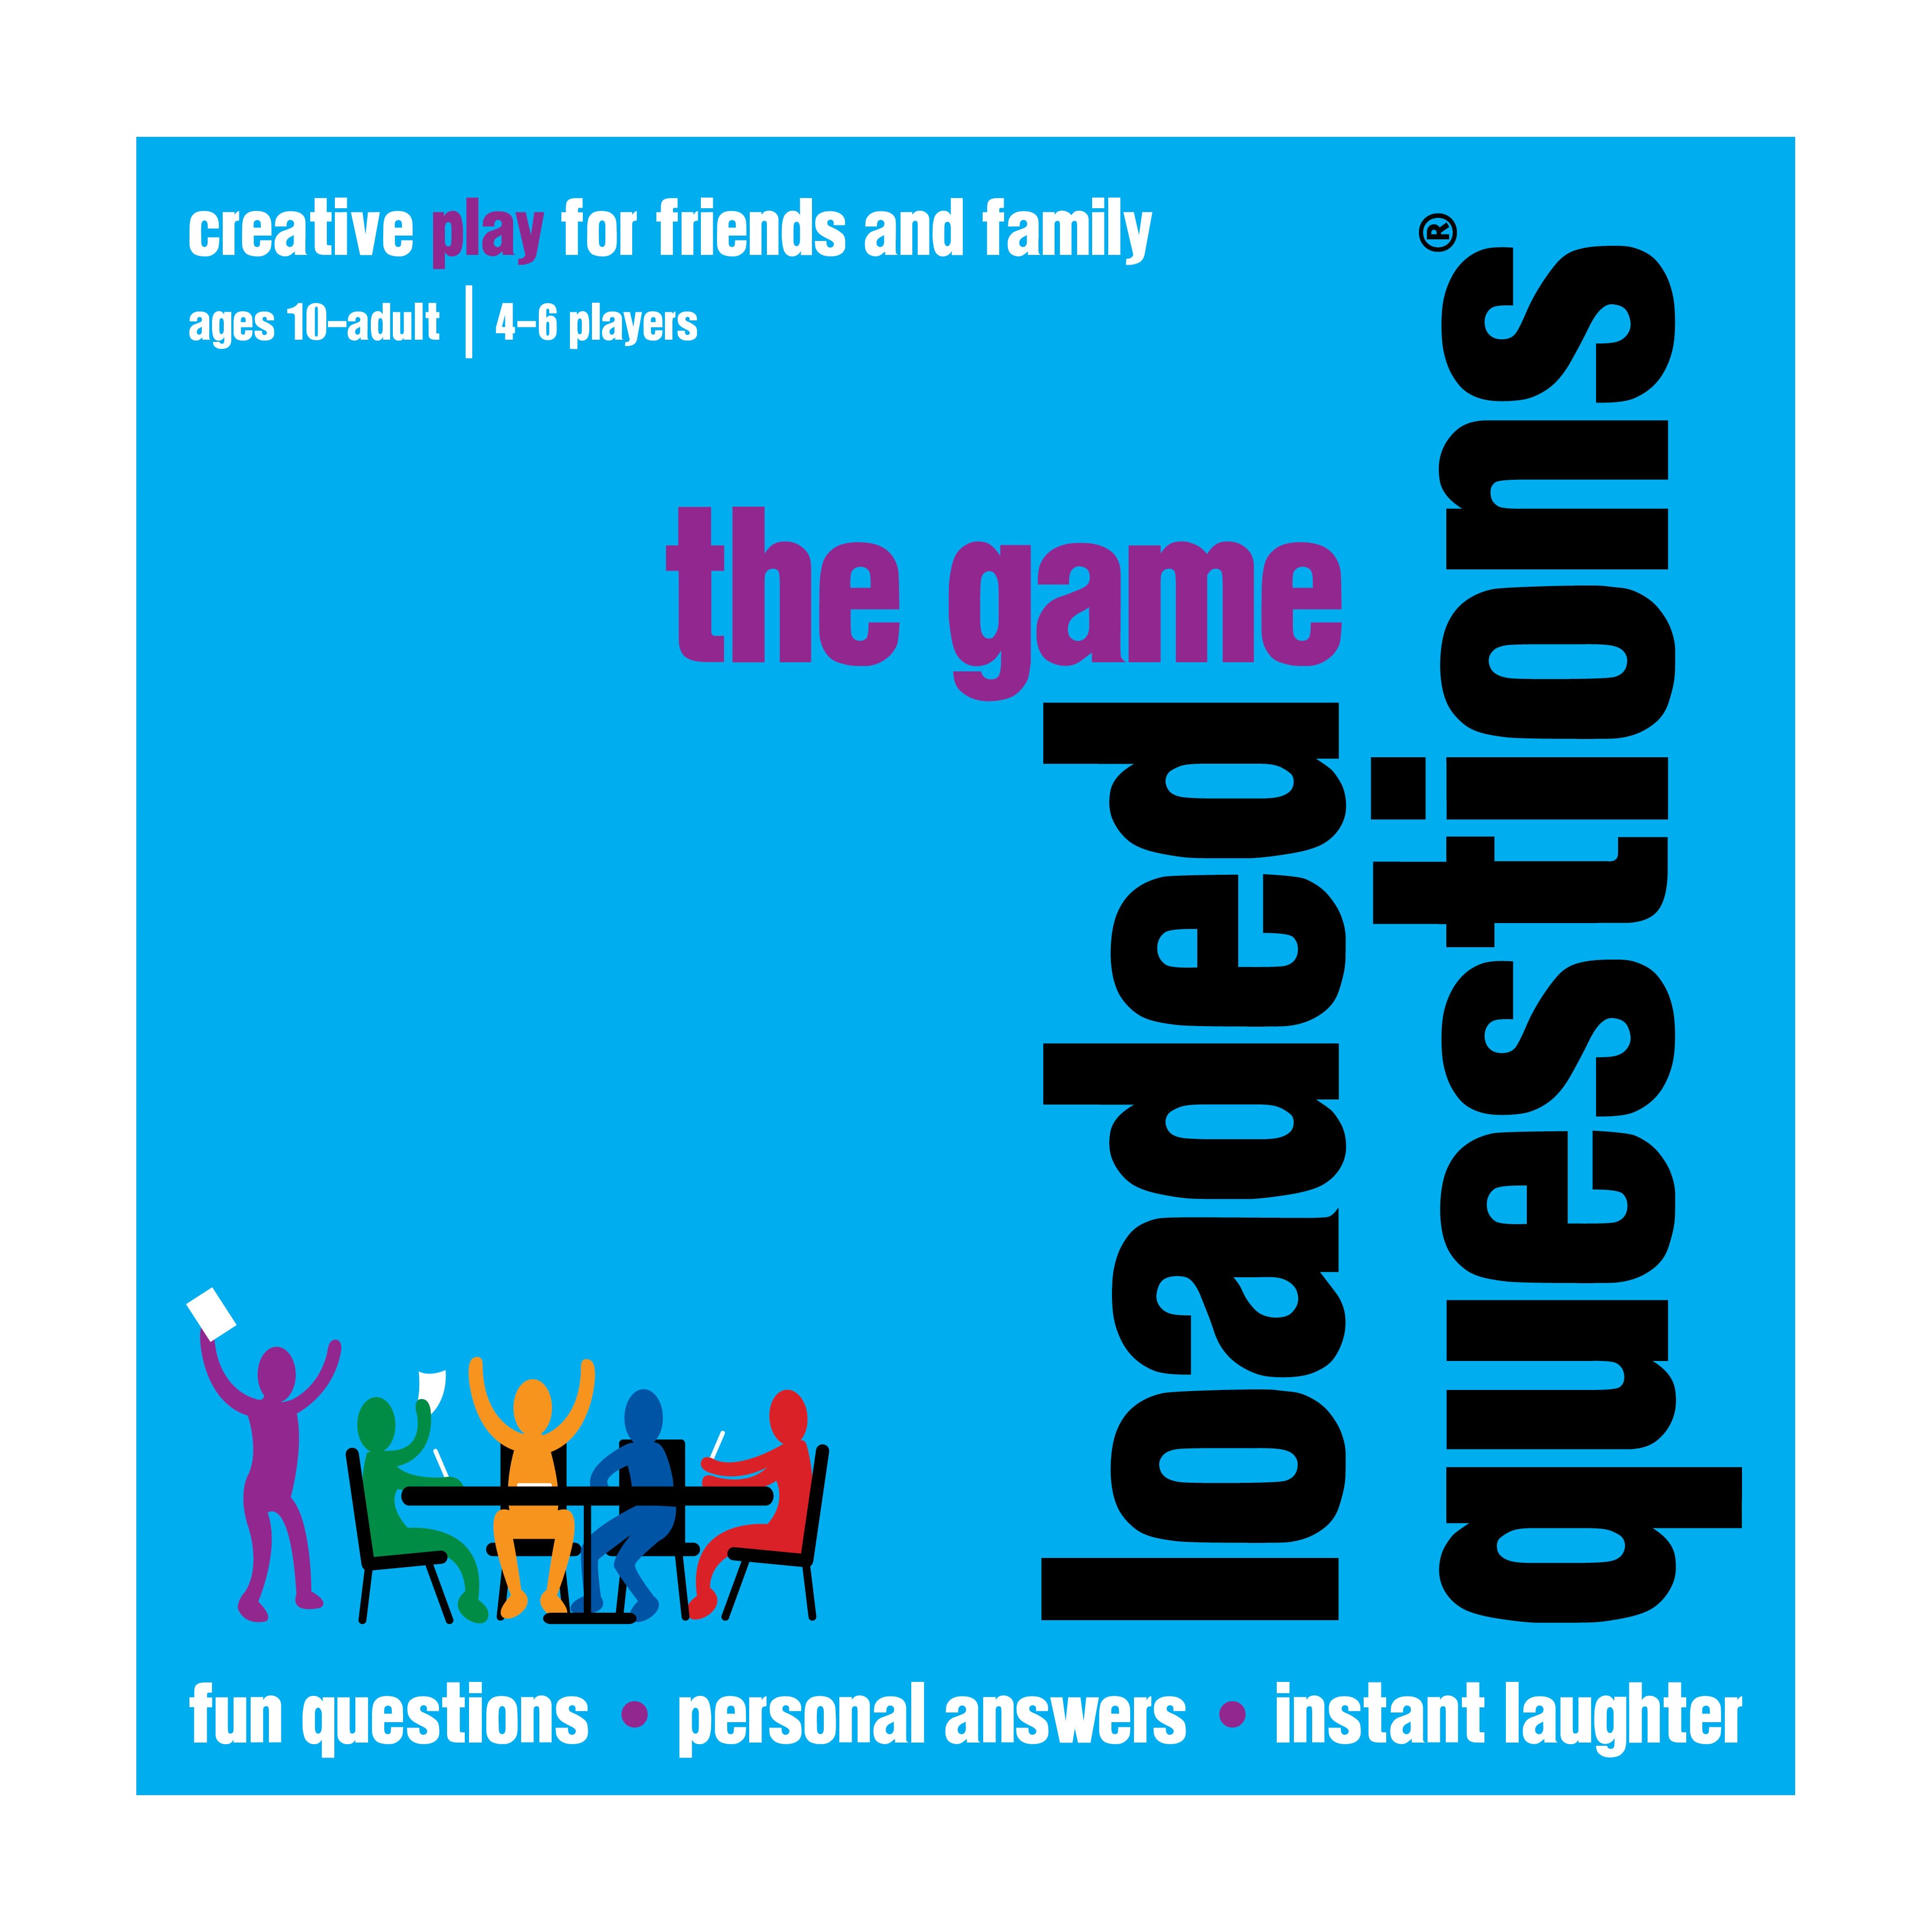 Loaded Questions&#xAE; The Game